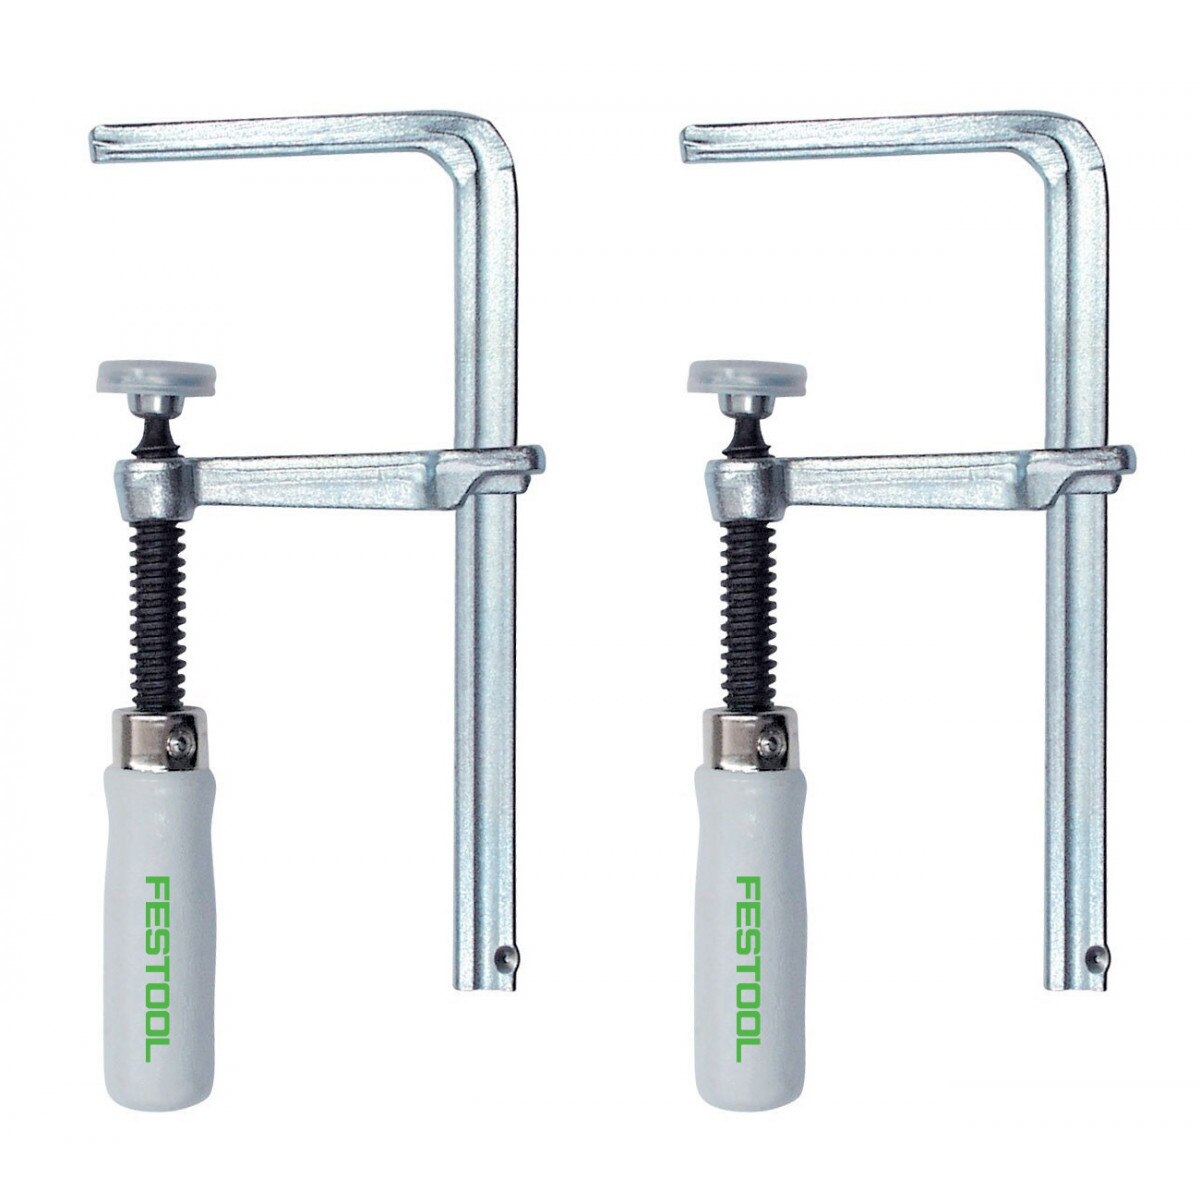 Festool Fastening clamp FSZ 120 (2 Pieces) 489570 Power Tool Services